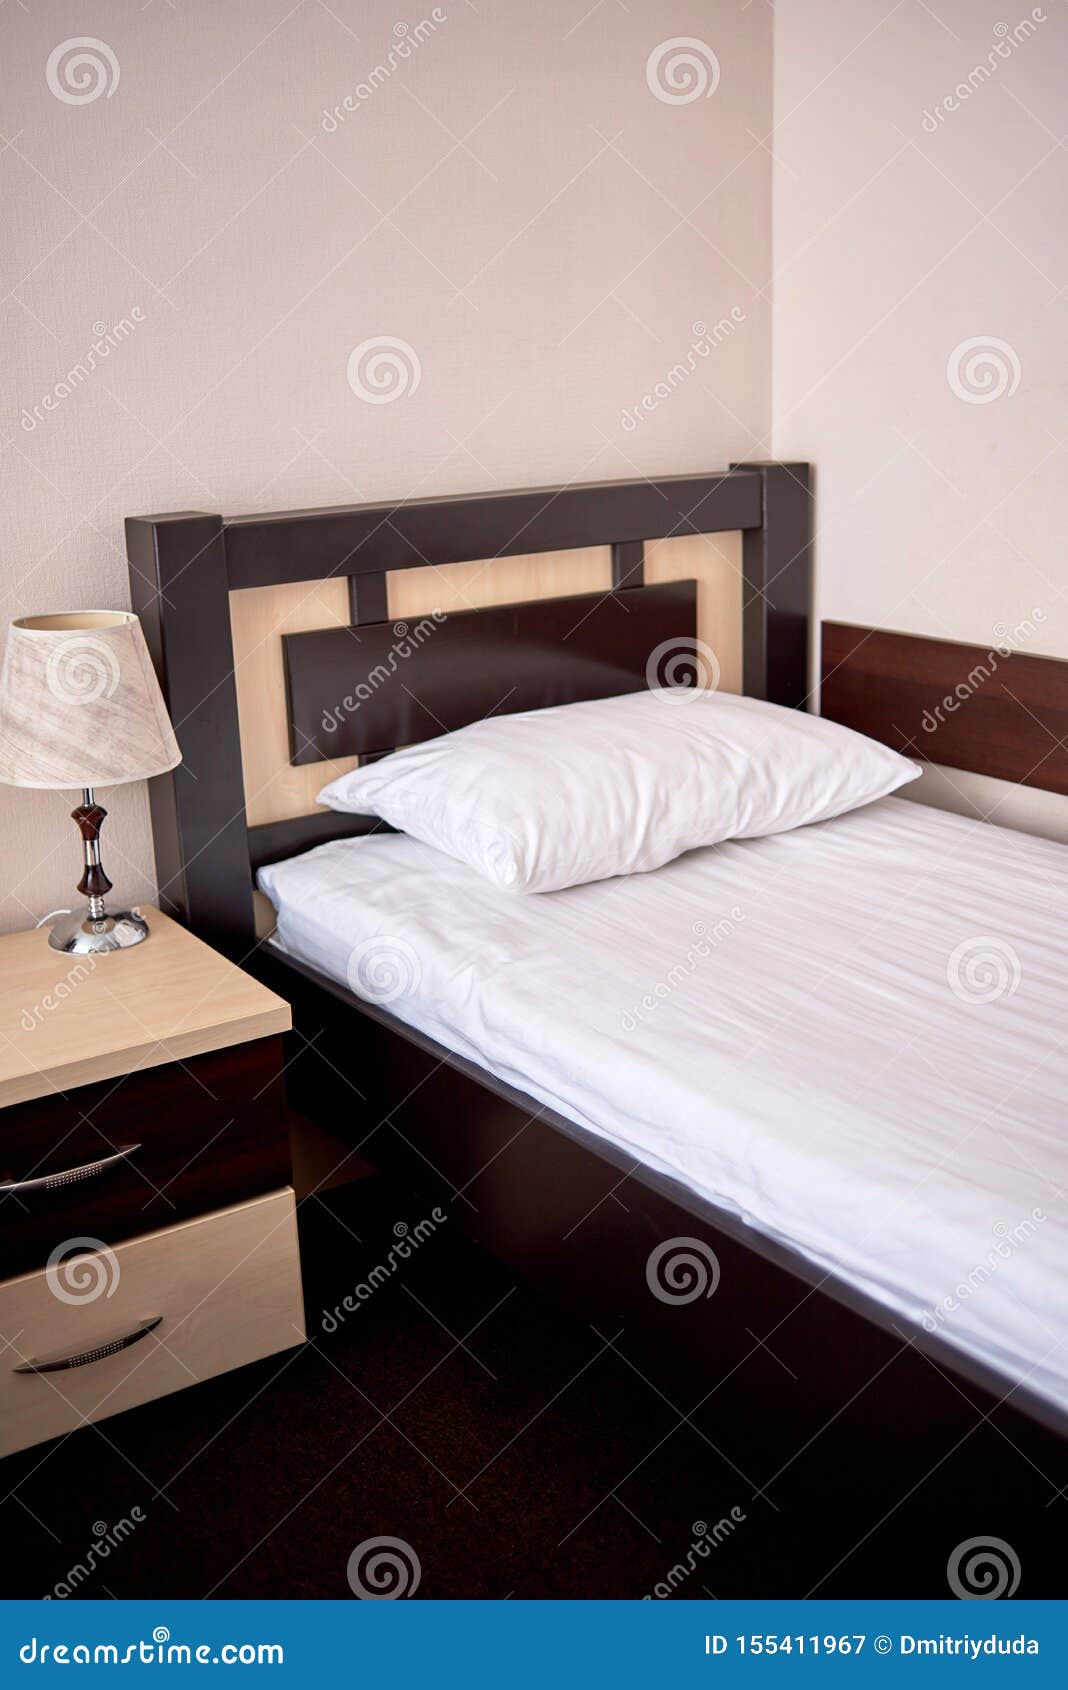 White Soft Pillow on Single Bed with Brown Wooden Headboard in ...